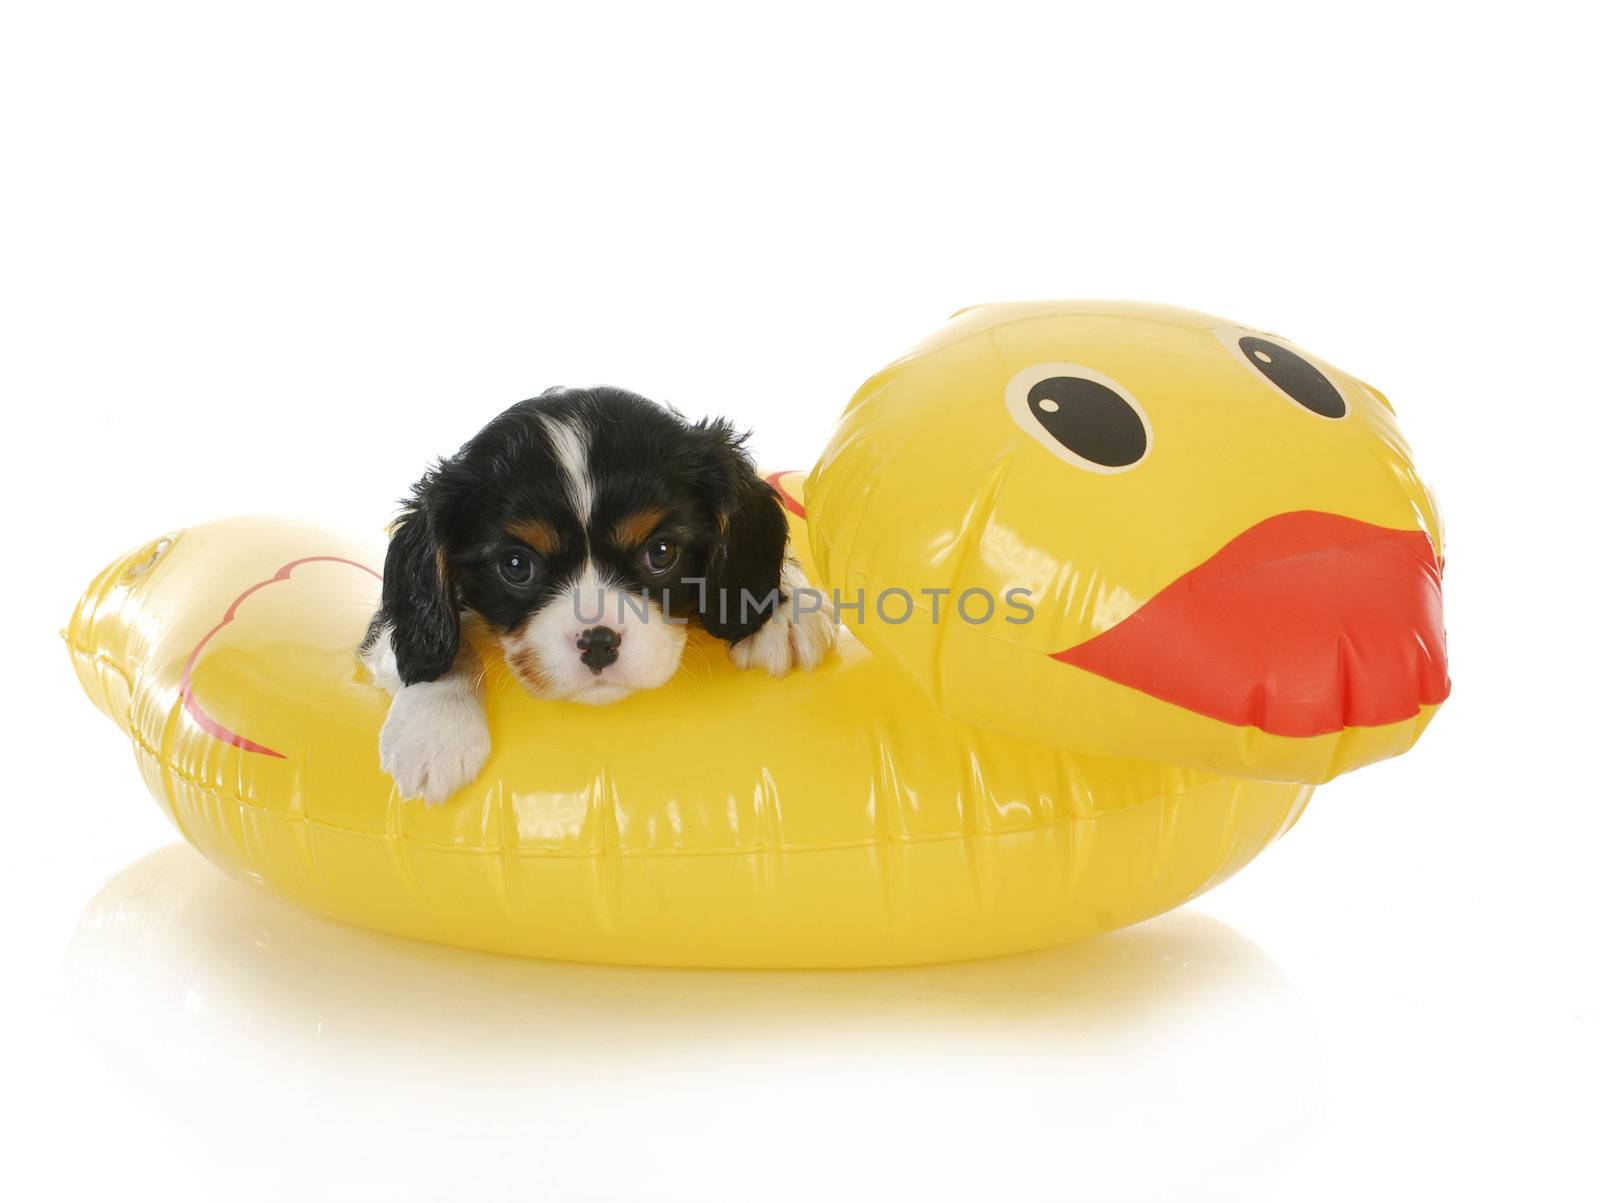 dog water safety - cavalier king charles spaniel on water floatation device